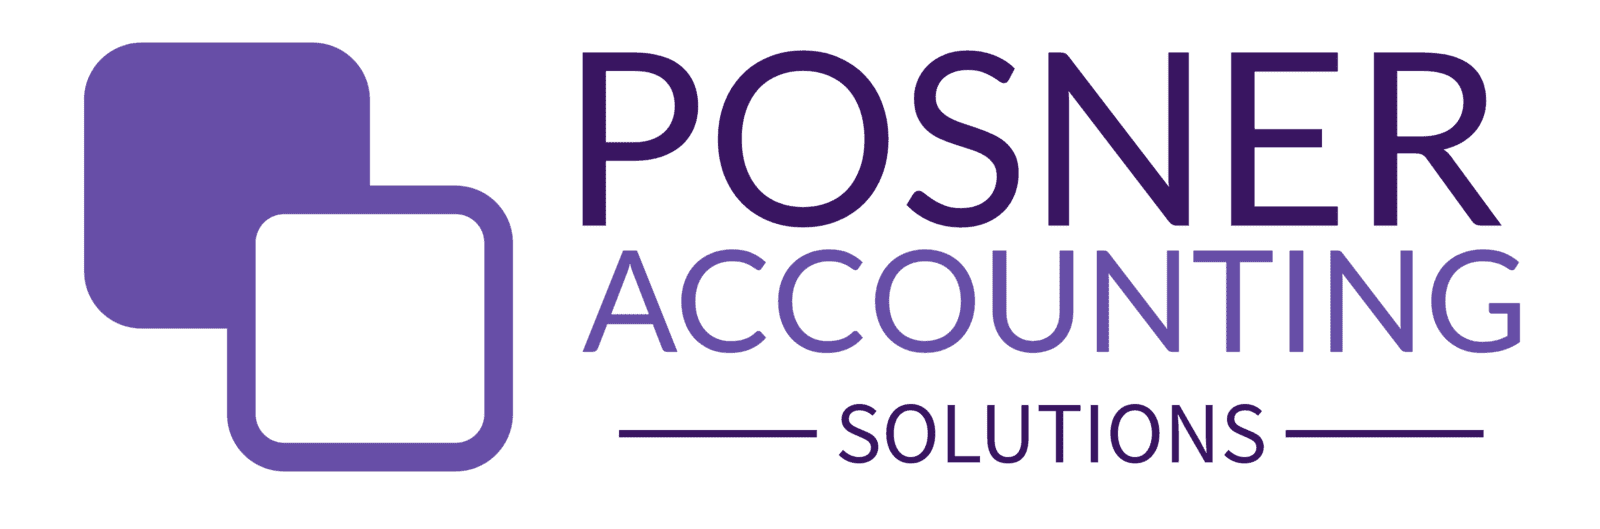 Posner Accounting Solutions Logo